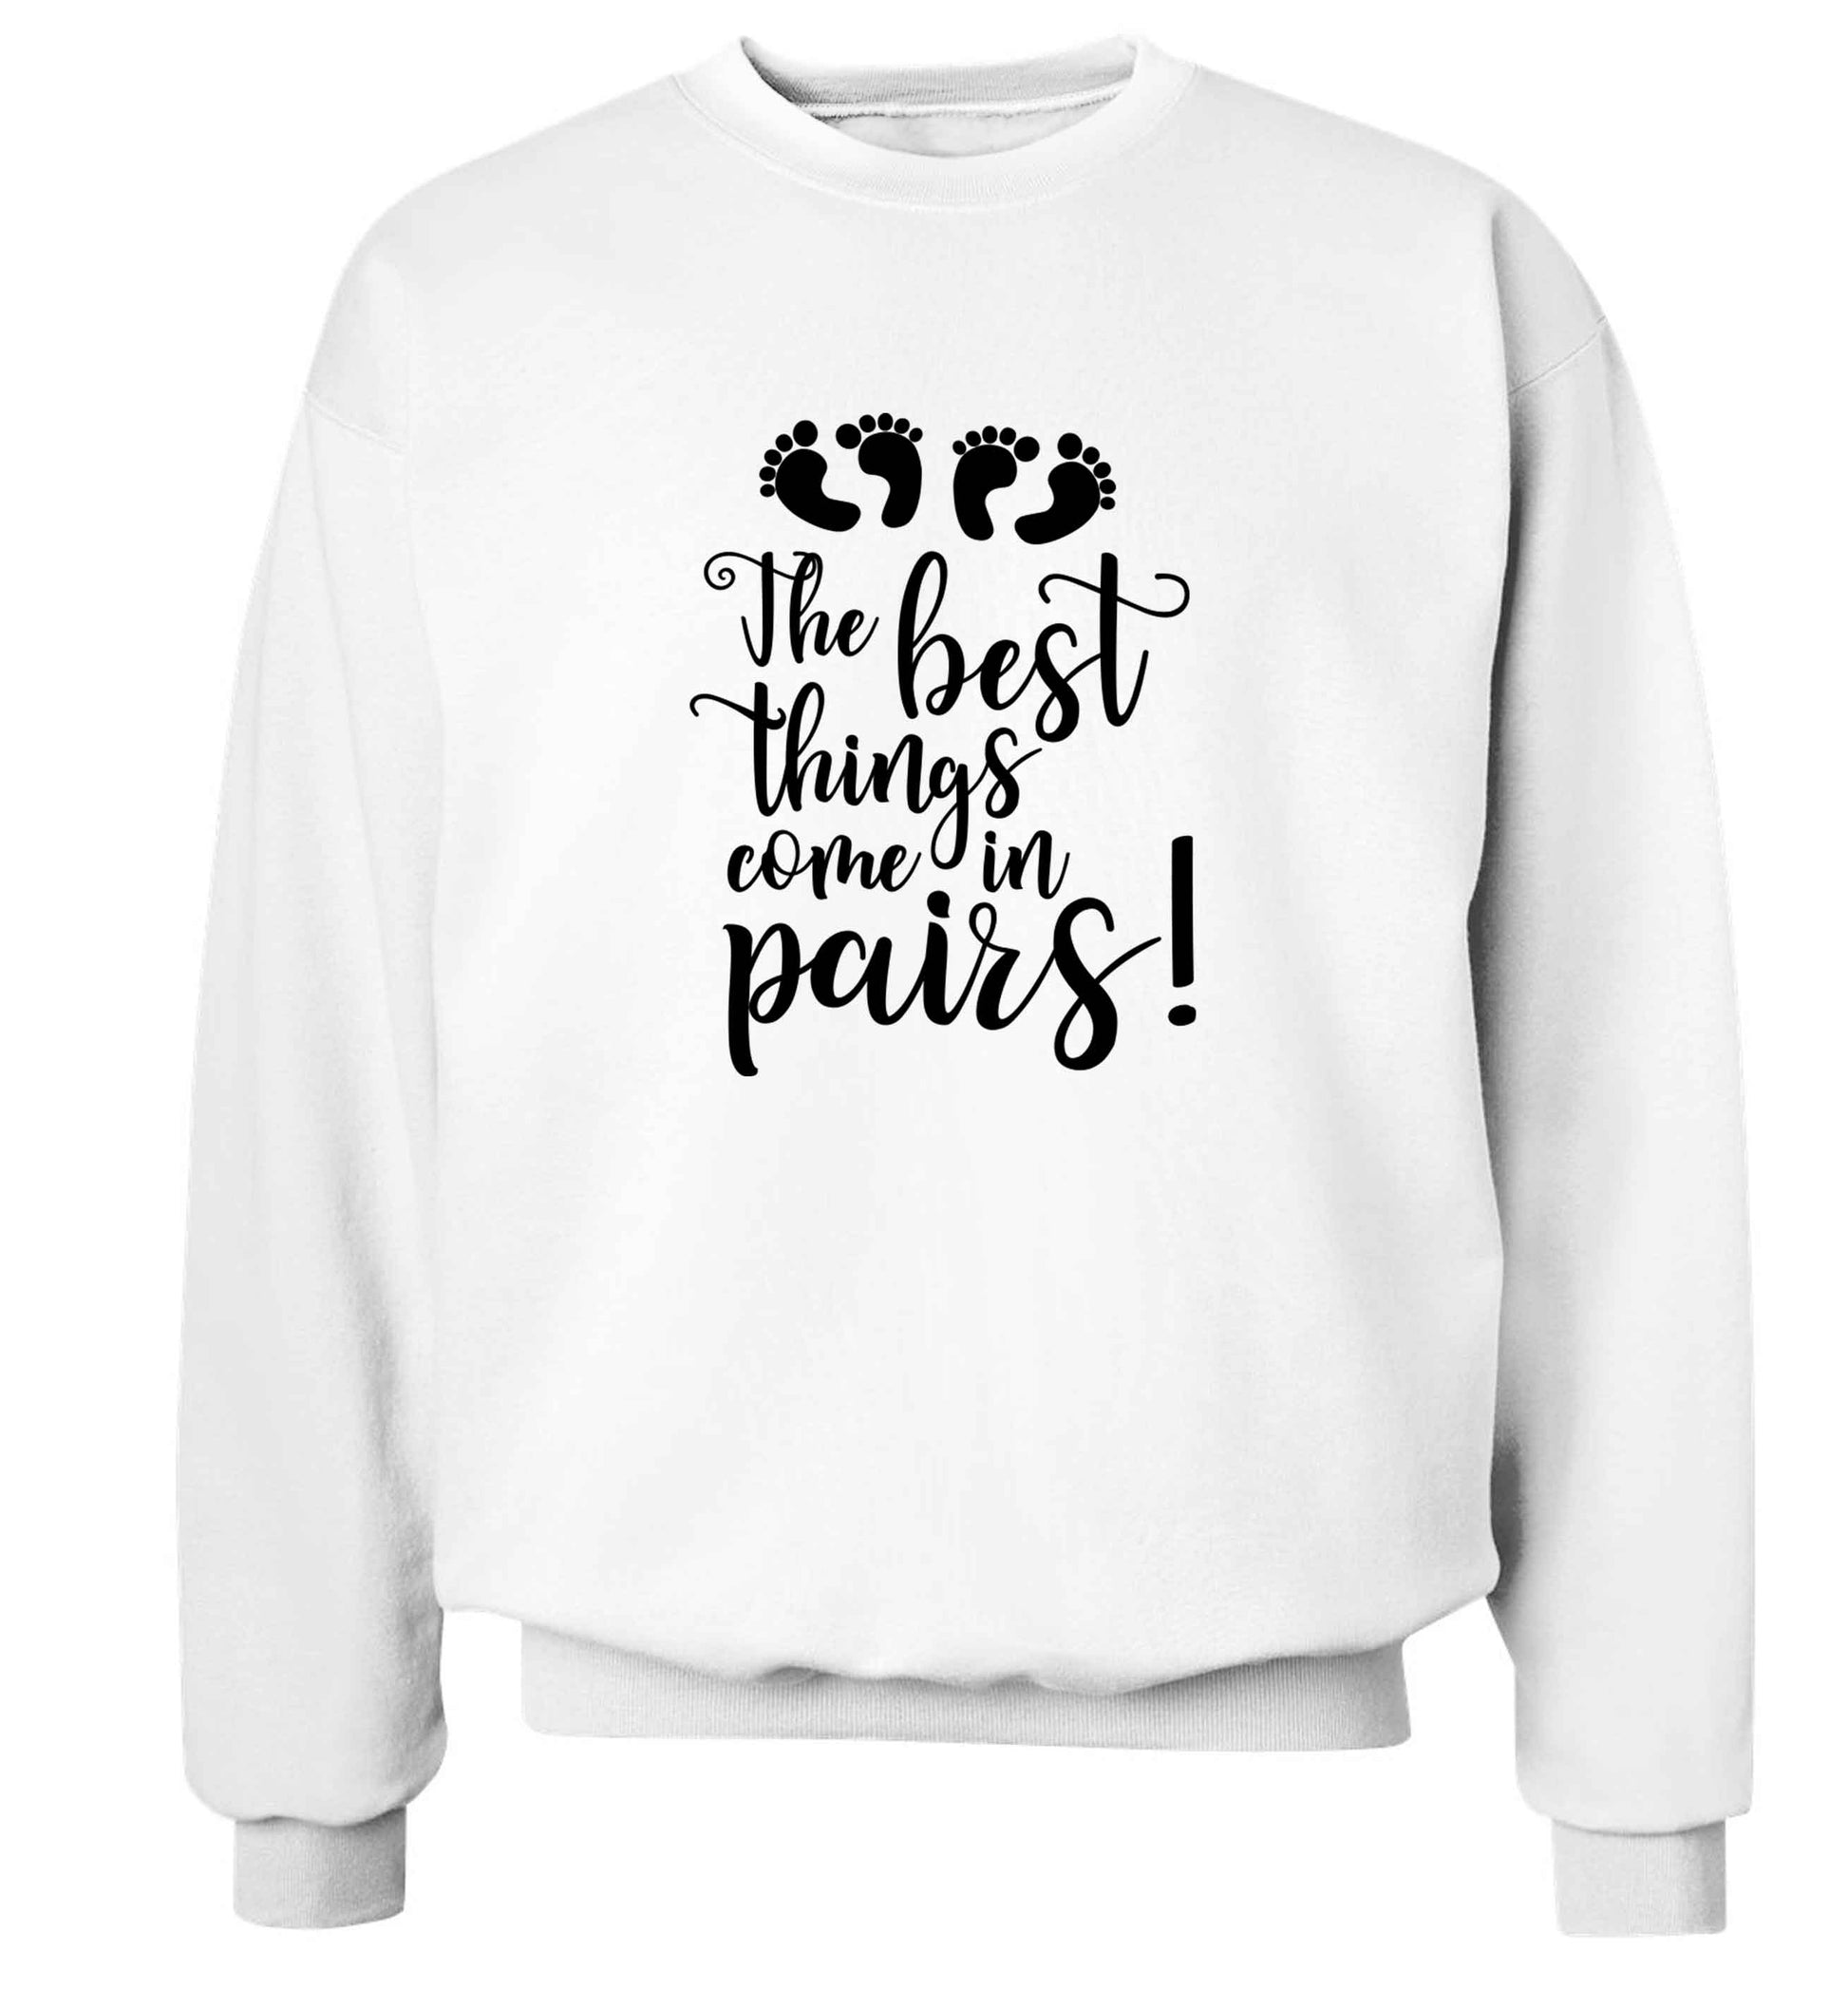 The best things come in pairs! adult's unisex white sweater 2XL